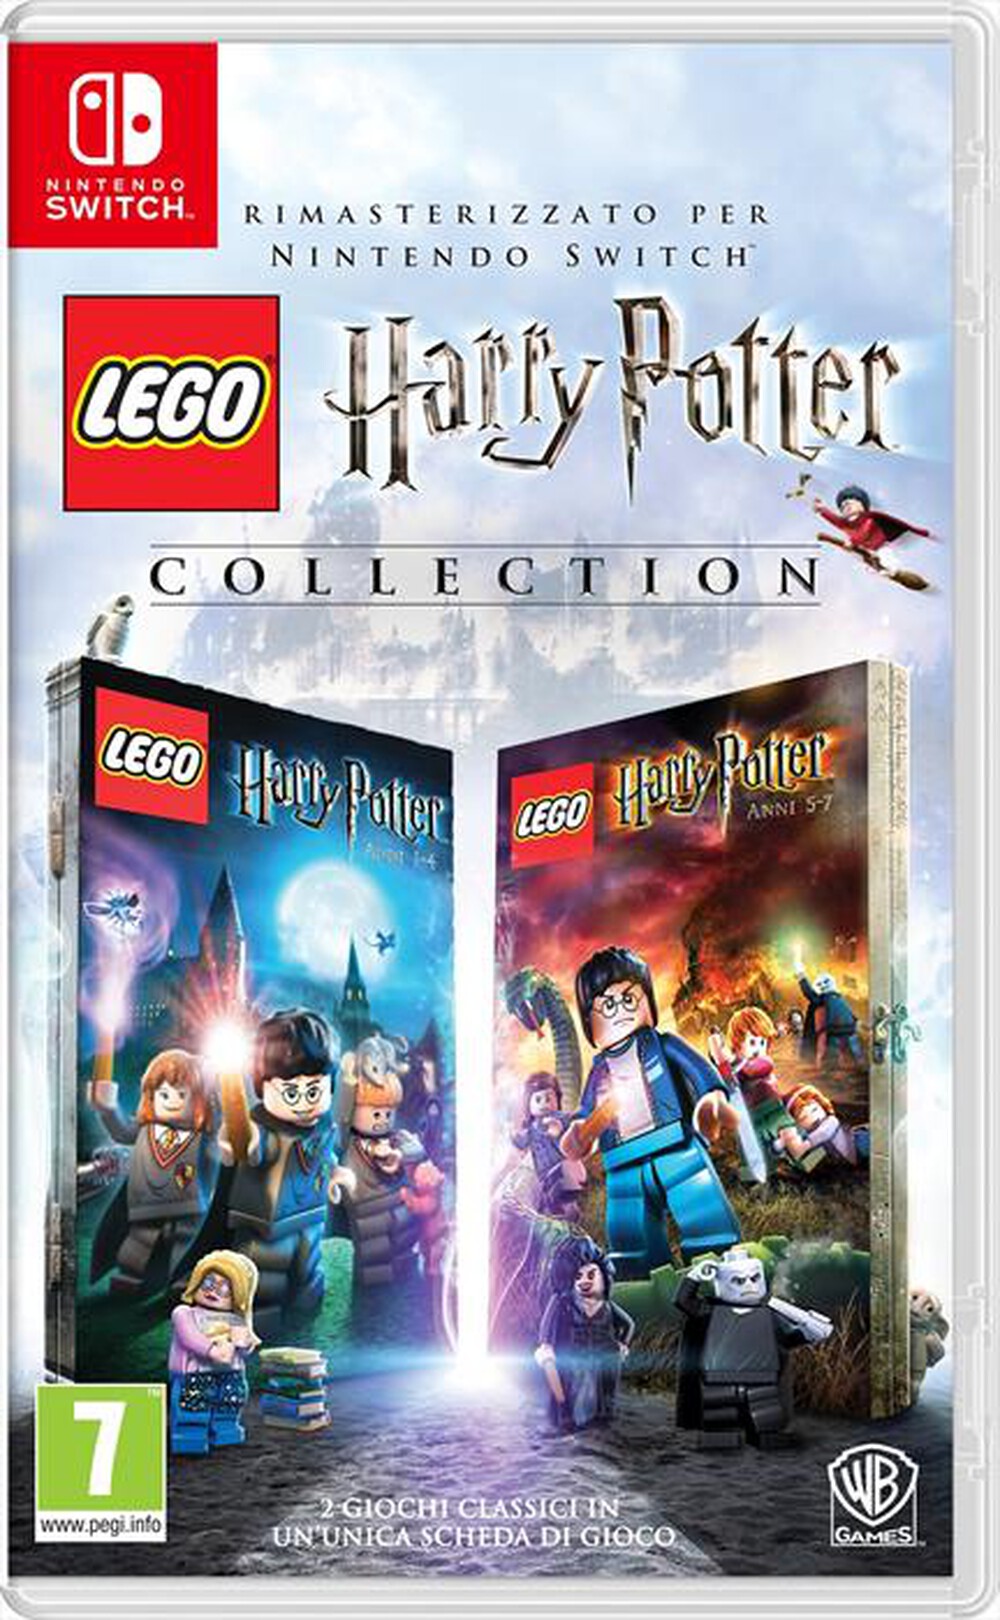 "WARNER GAMES - LEGO HARRY POTTER COLLECTION (NS)"